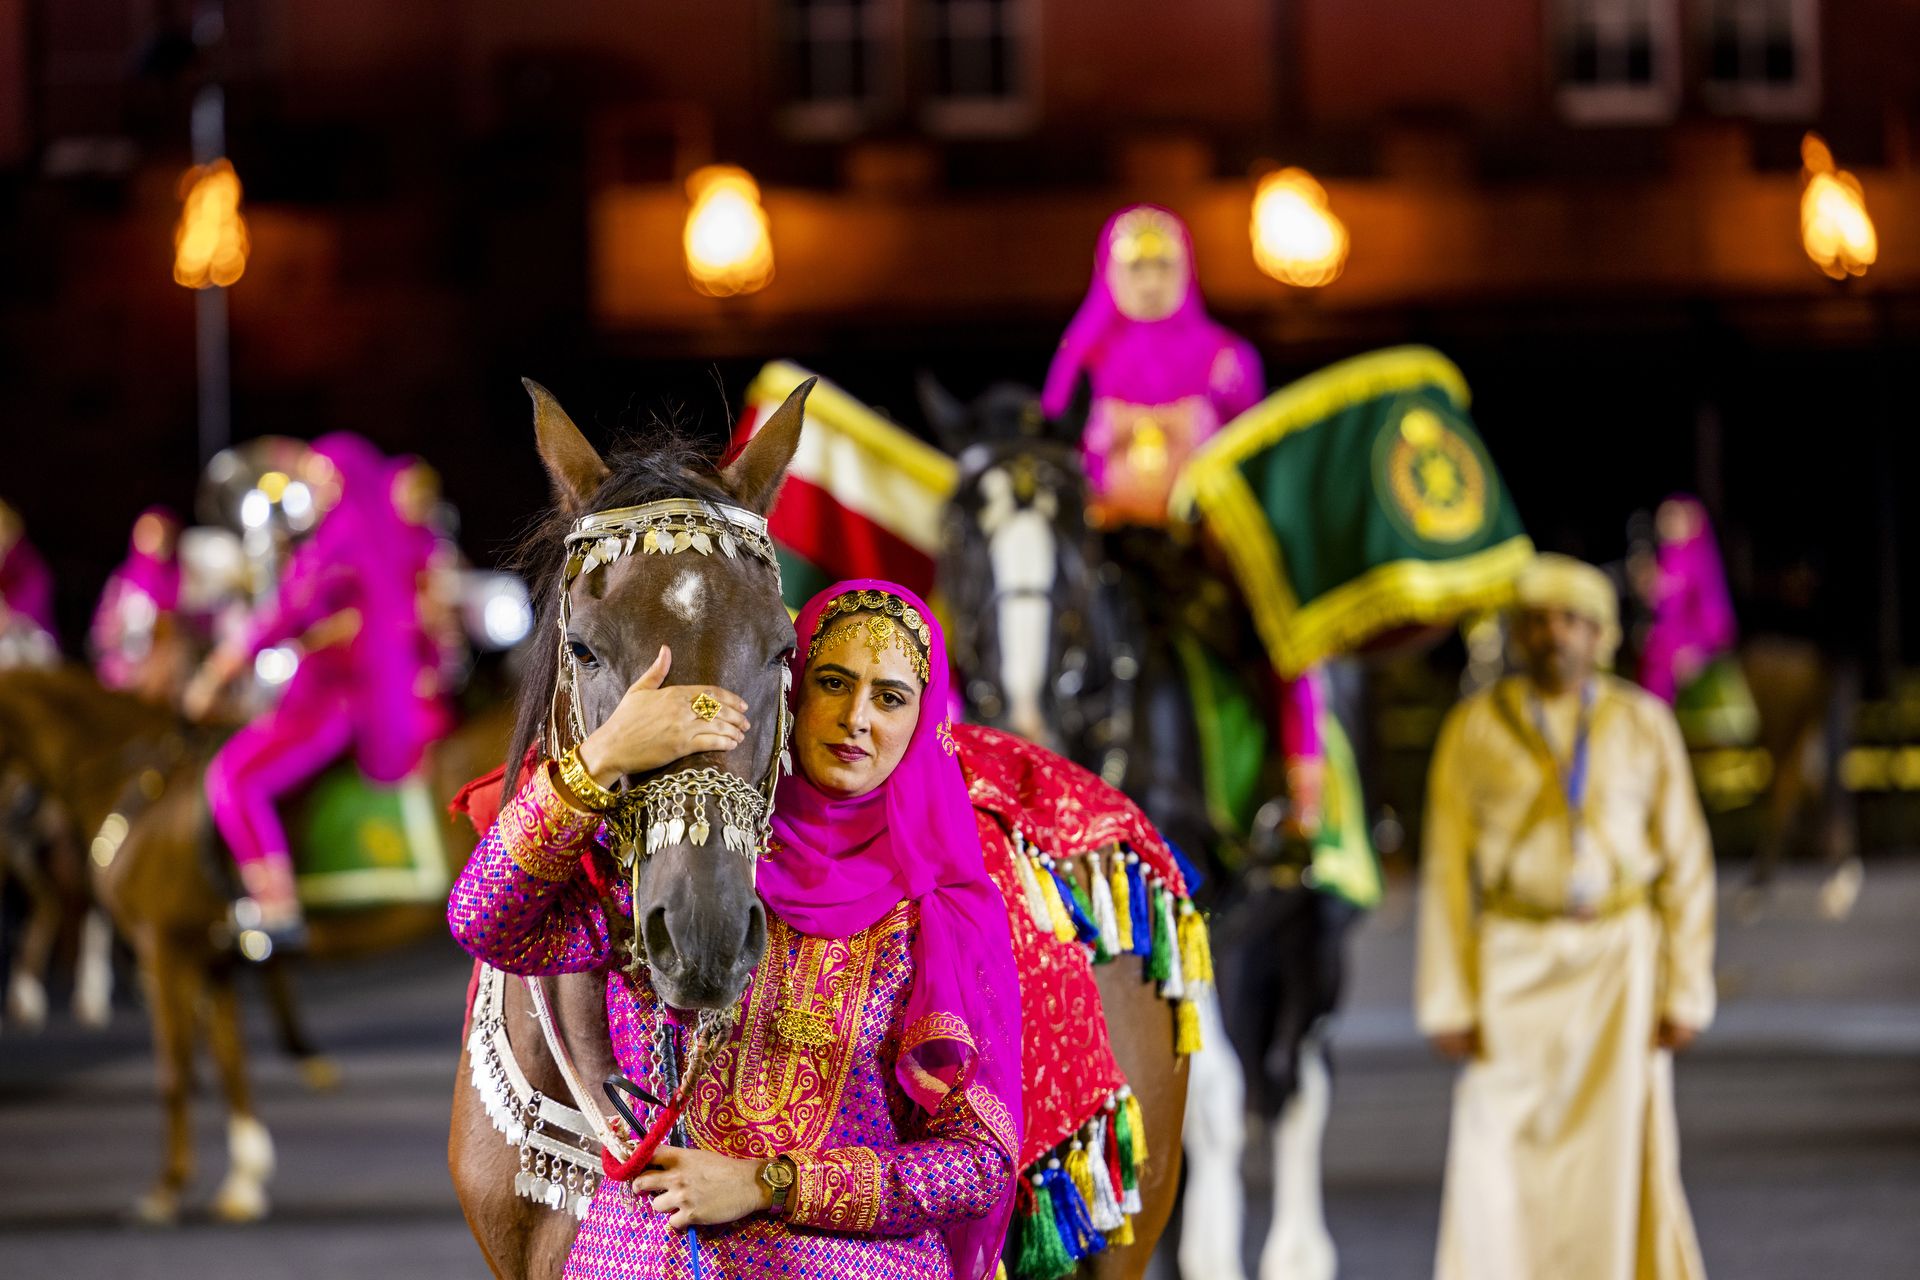 Eine Frau der "The Combined Bands of the Royal Cavalry and the Royal Guard of Oman" und ihr Pferd in der Kaserne Basel 2023